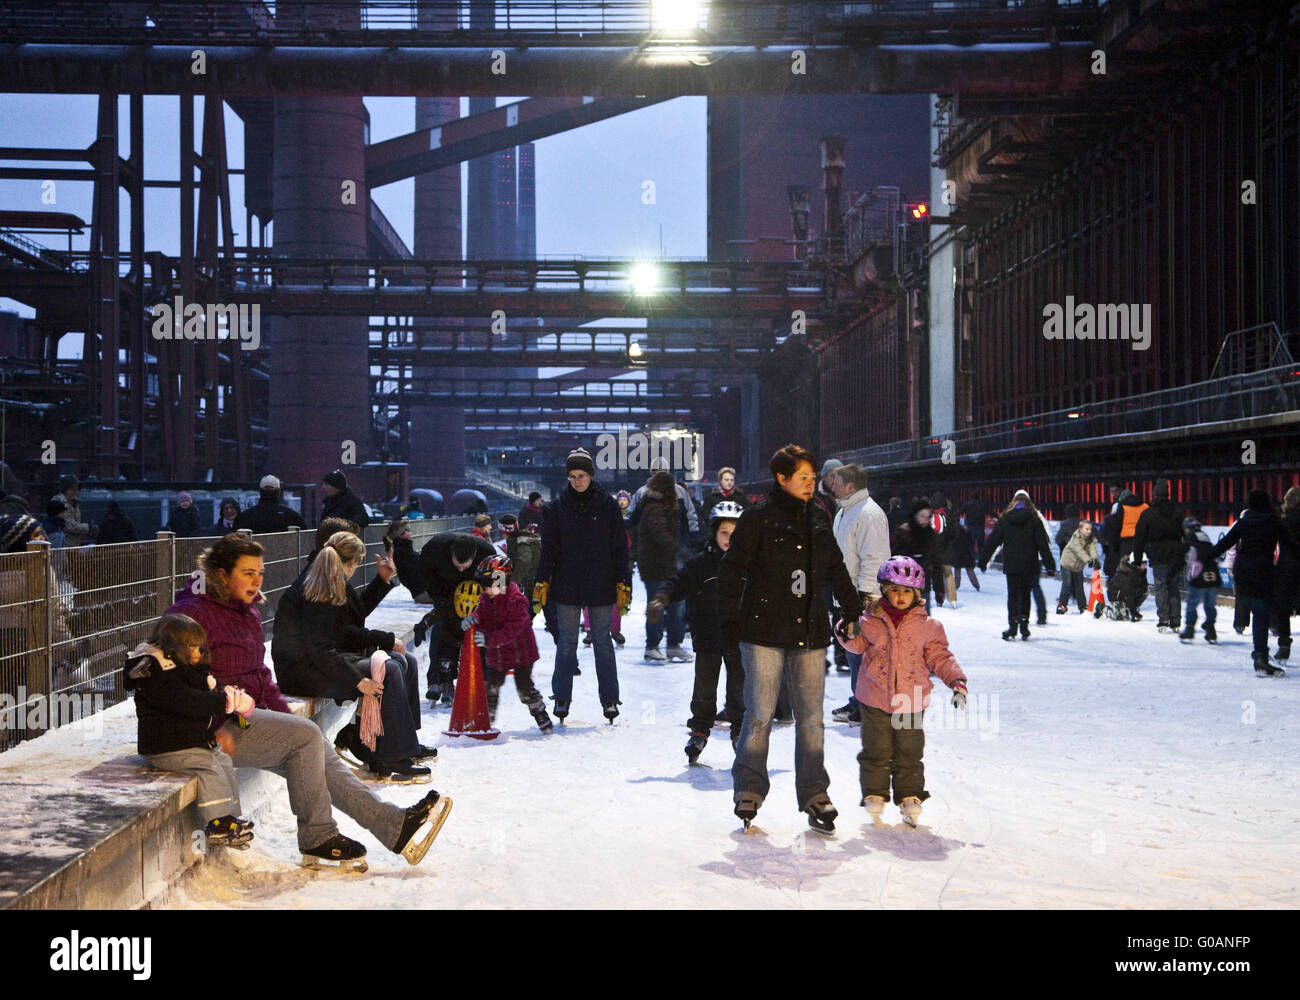 People at the rink, Zollverein, Essen, Germany Stock Photo